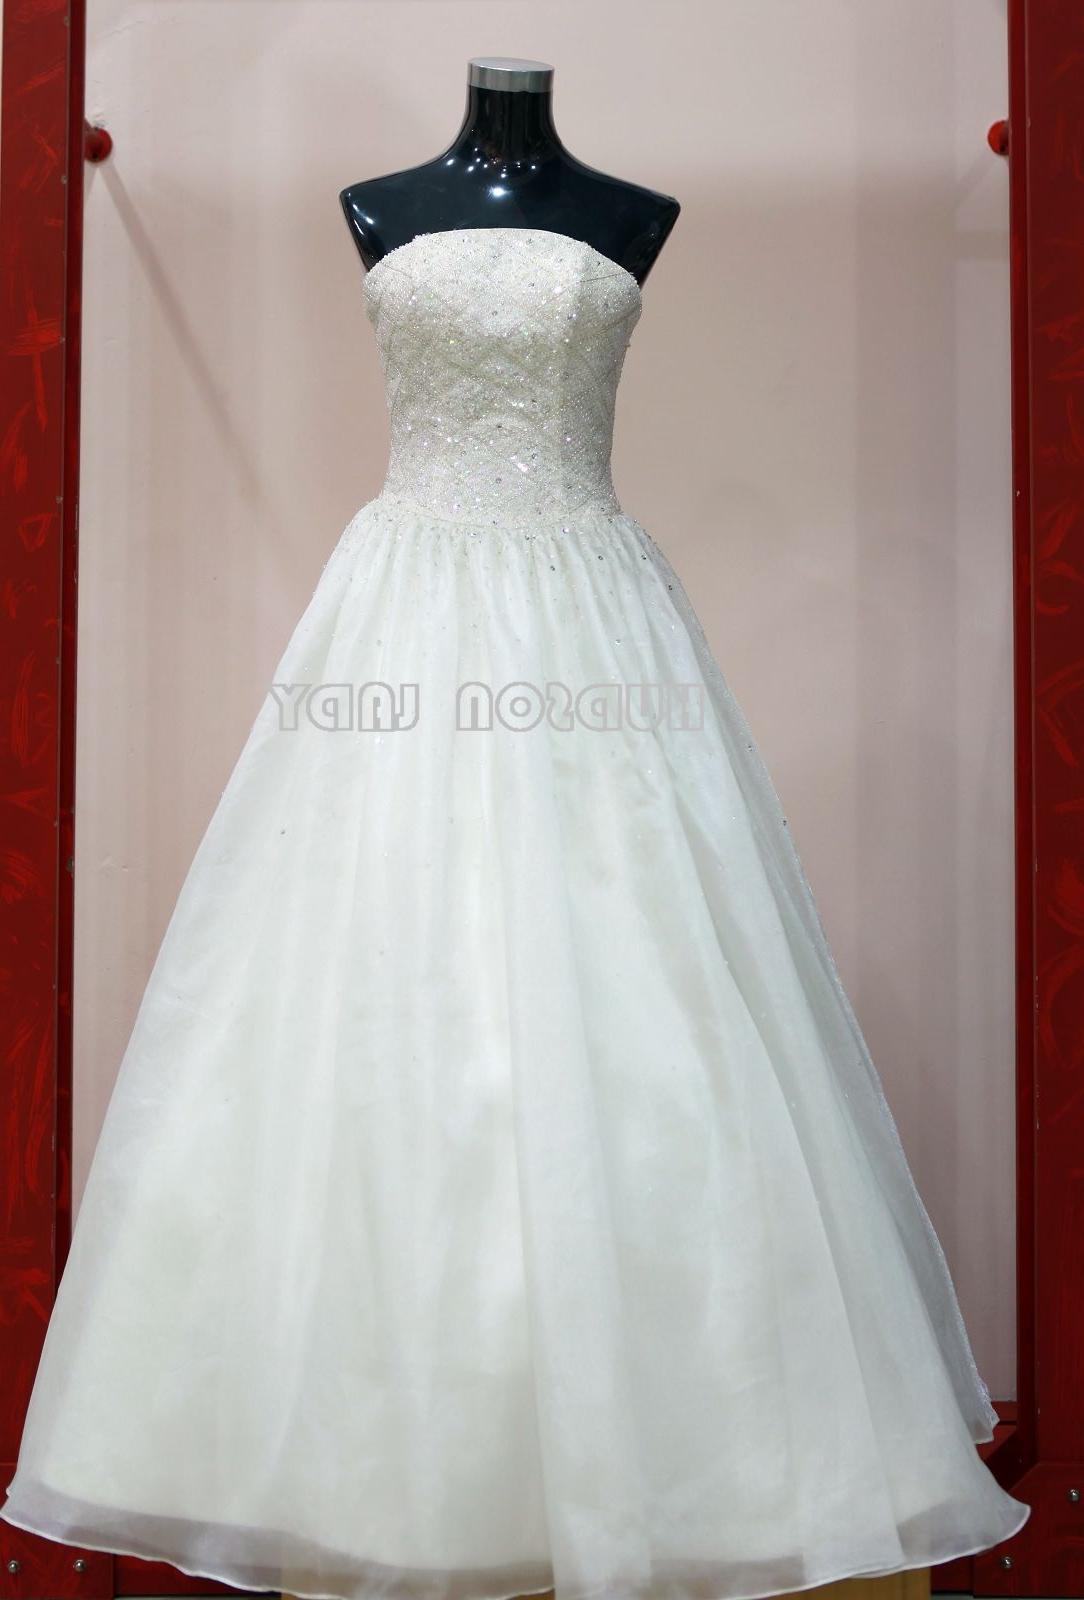 Organza colorful sequin shining wedding dress. Inquire now